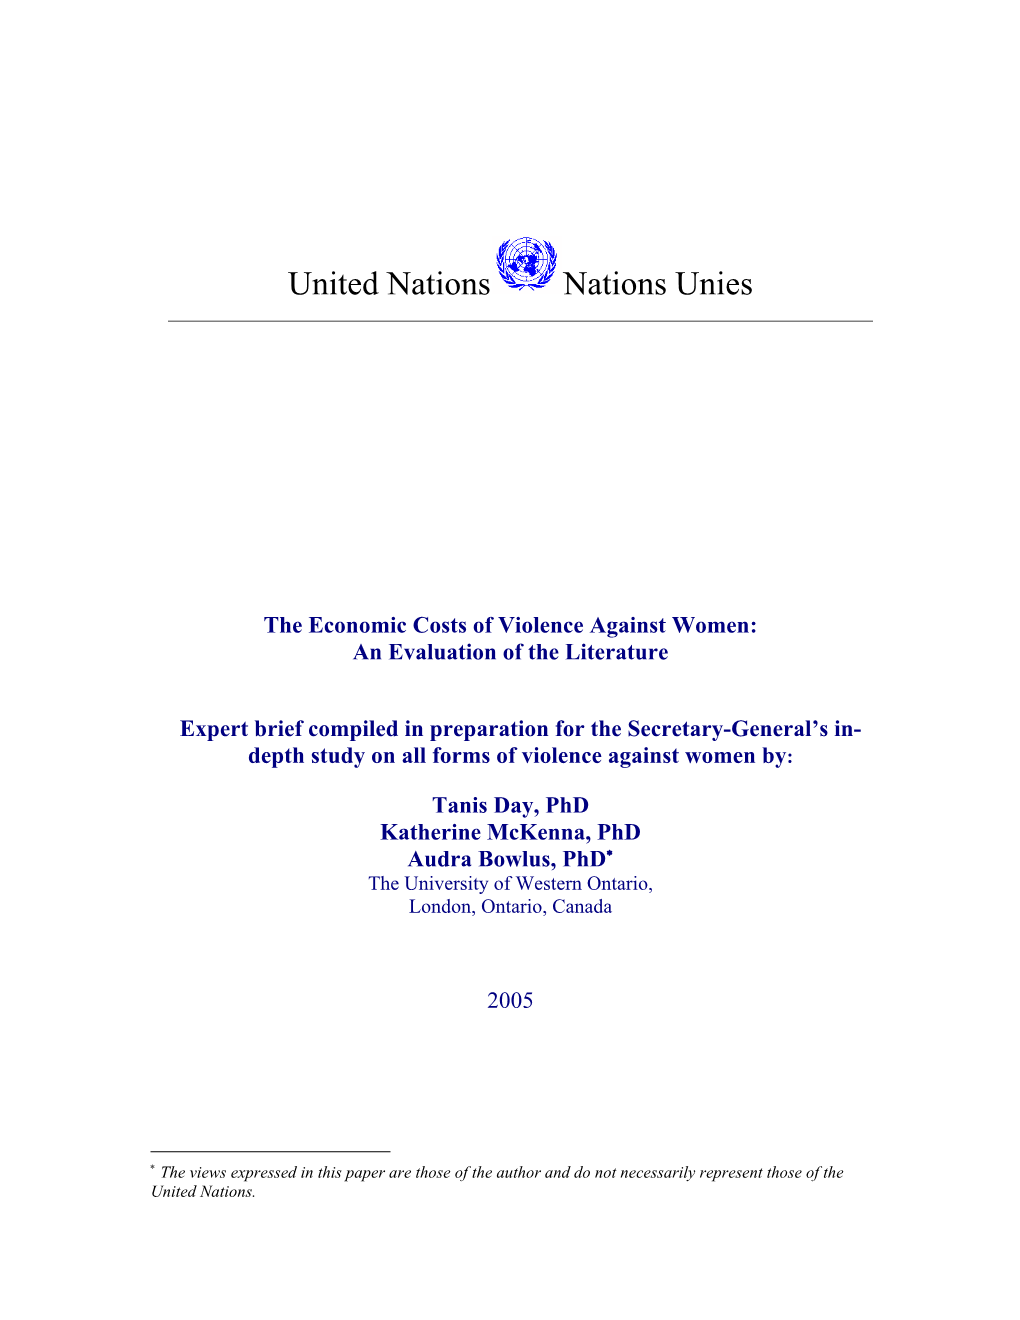 The Economic Costs of Violence Against Women: an Evaluation of the Literature